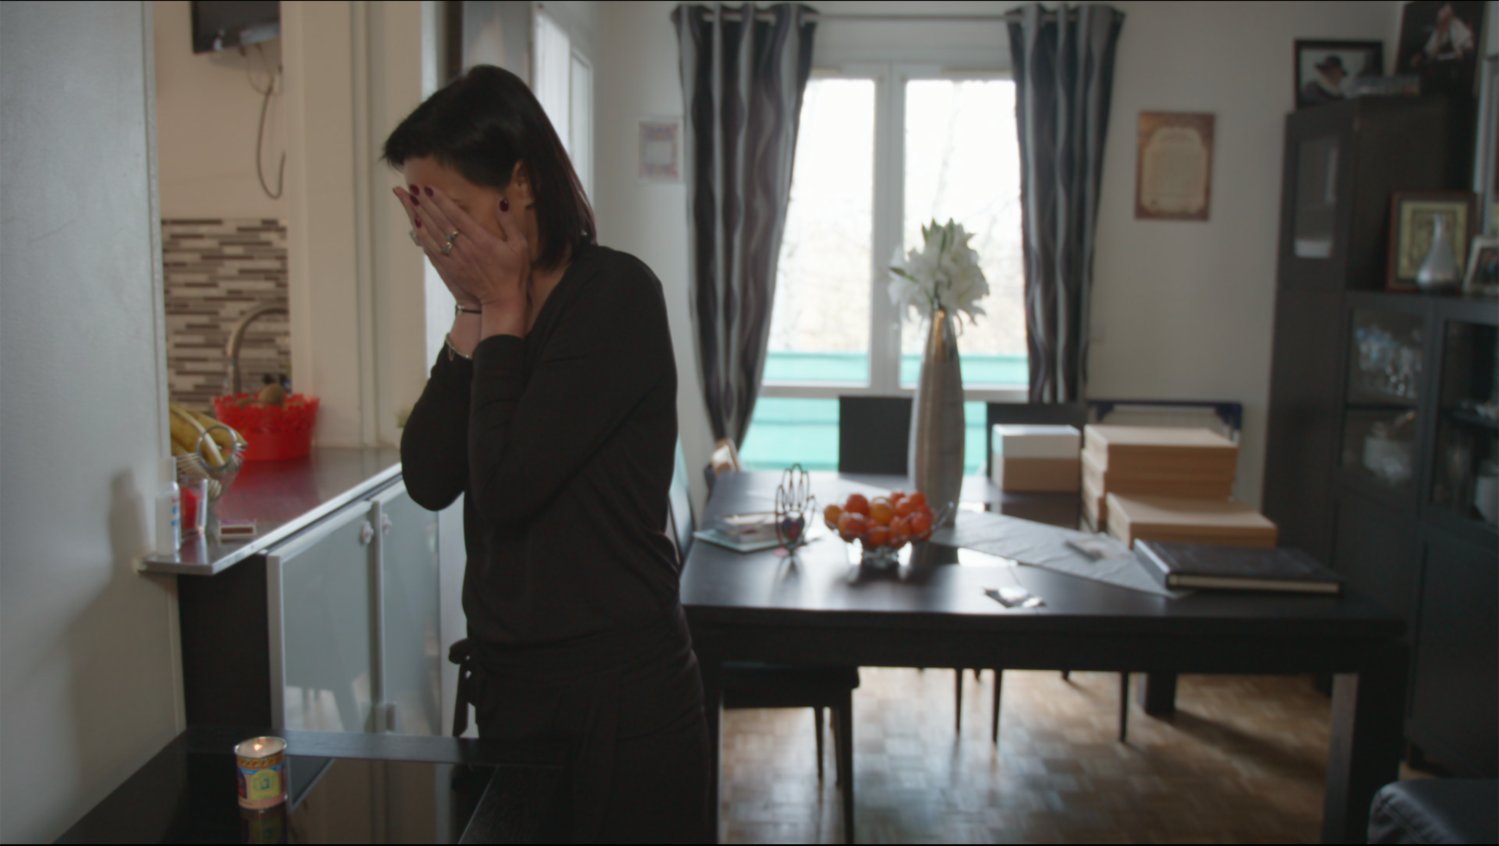 Valerie Braham, widow of one of the victims of the Hyper Cacher grocery store shooting in Paris, appears in “Viral: Antisemitism in Four Mutations.”